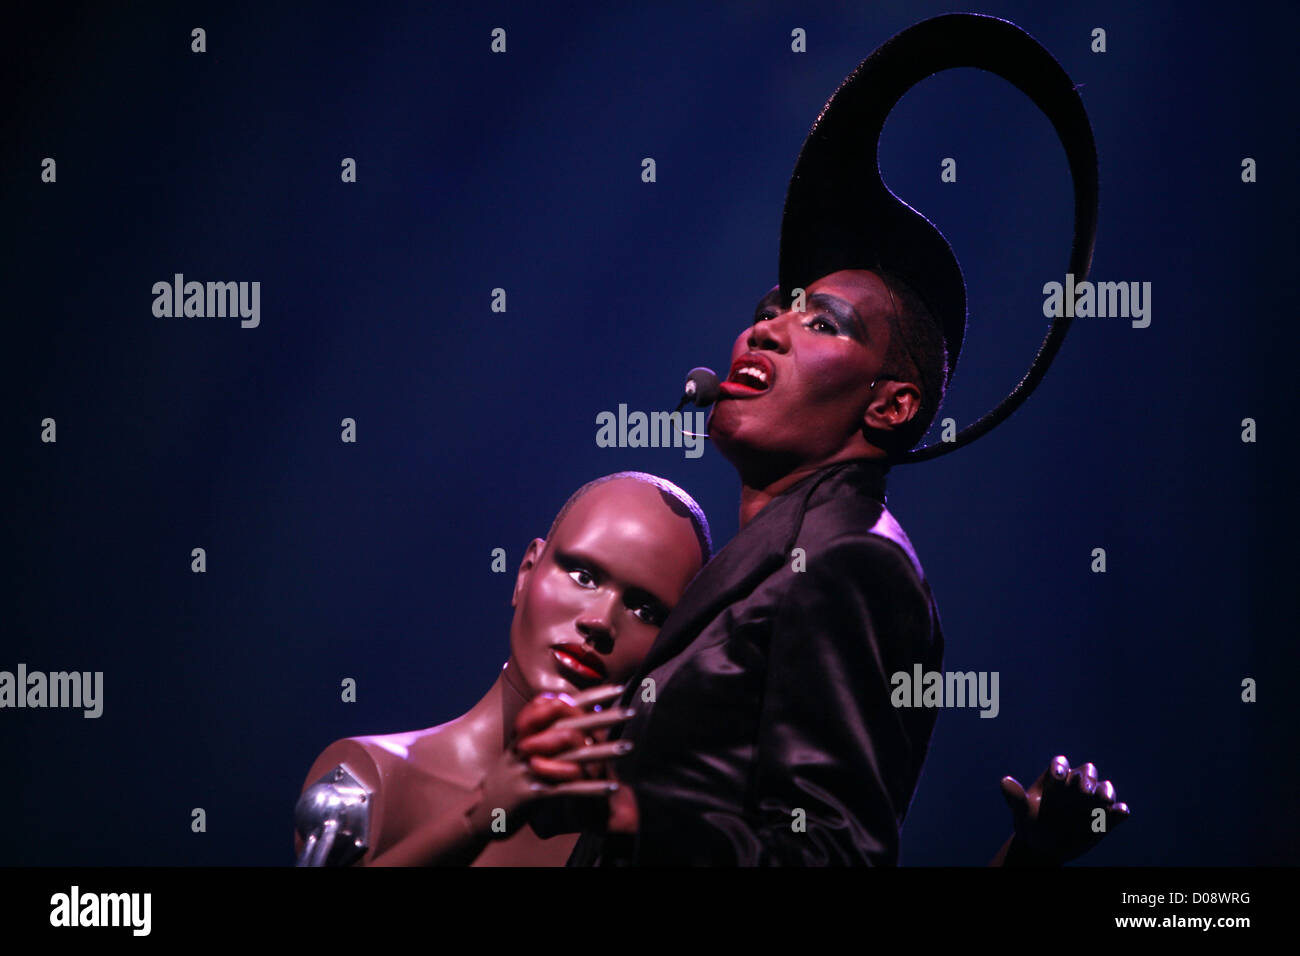 Grace Jones performs at Night Of The Proms at GelreDome Arnhem, The Netherlands - 13.11.10 Stock Photo